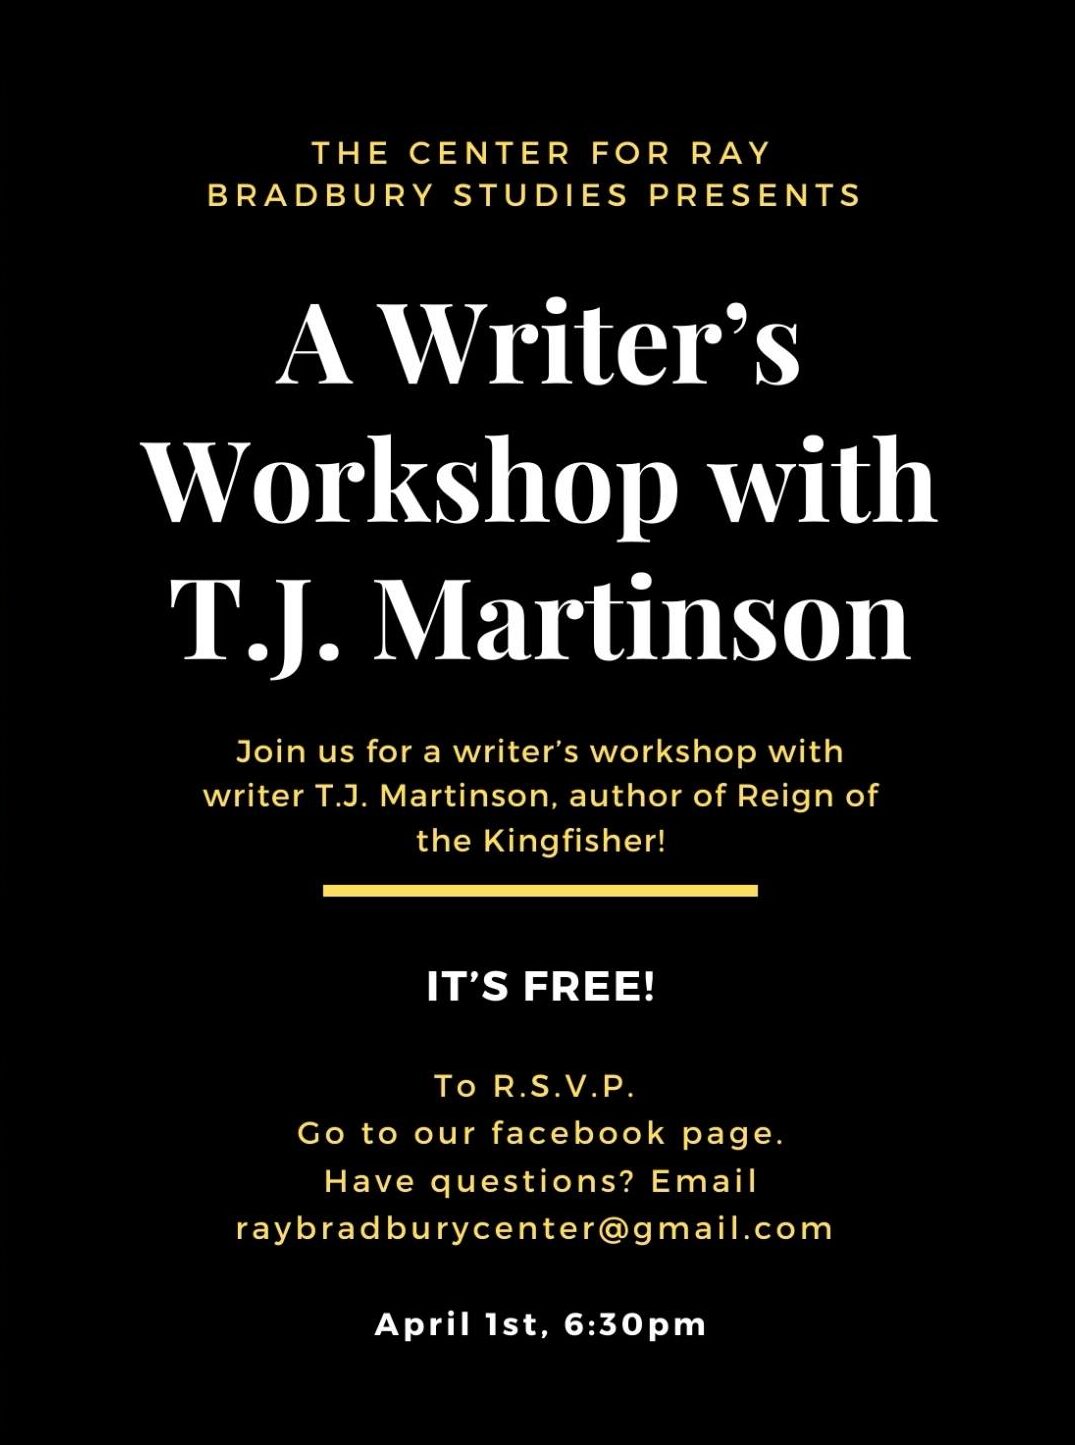 Writer’s Workshop with author T.J. Martinson on April 1st